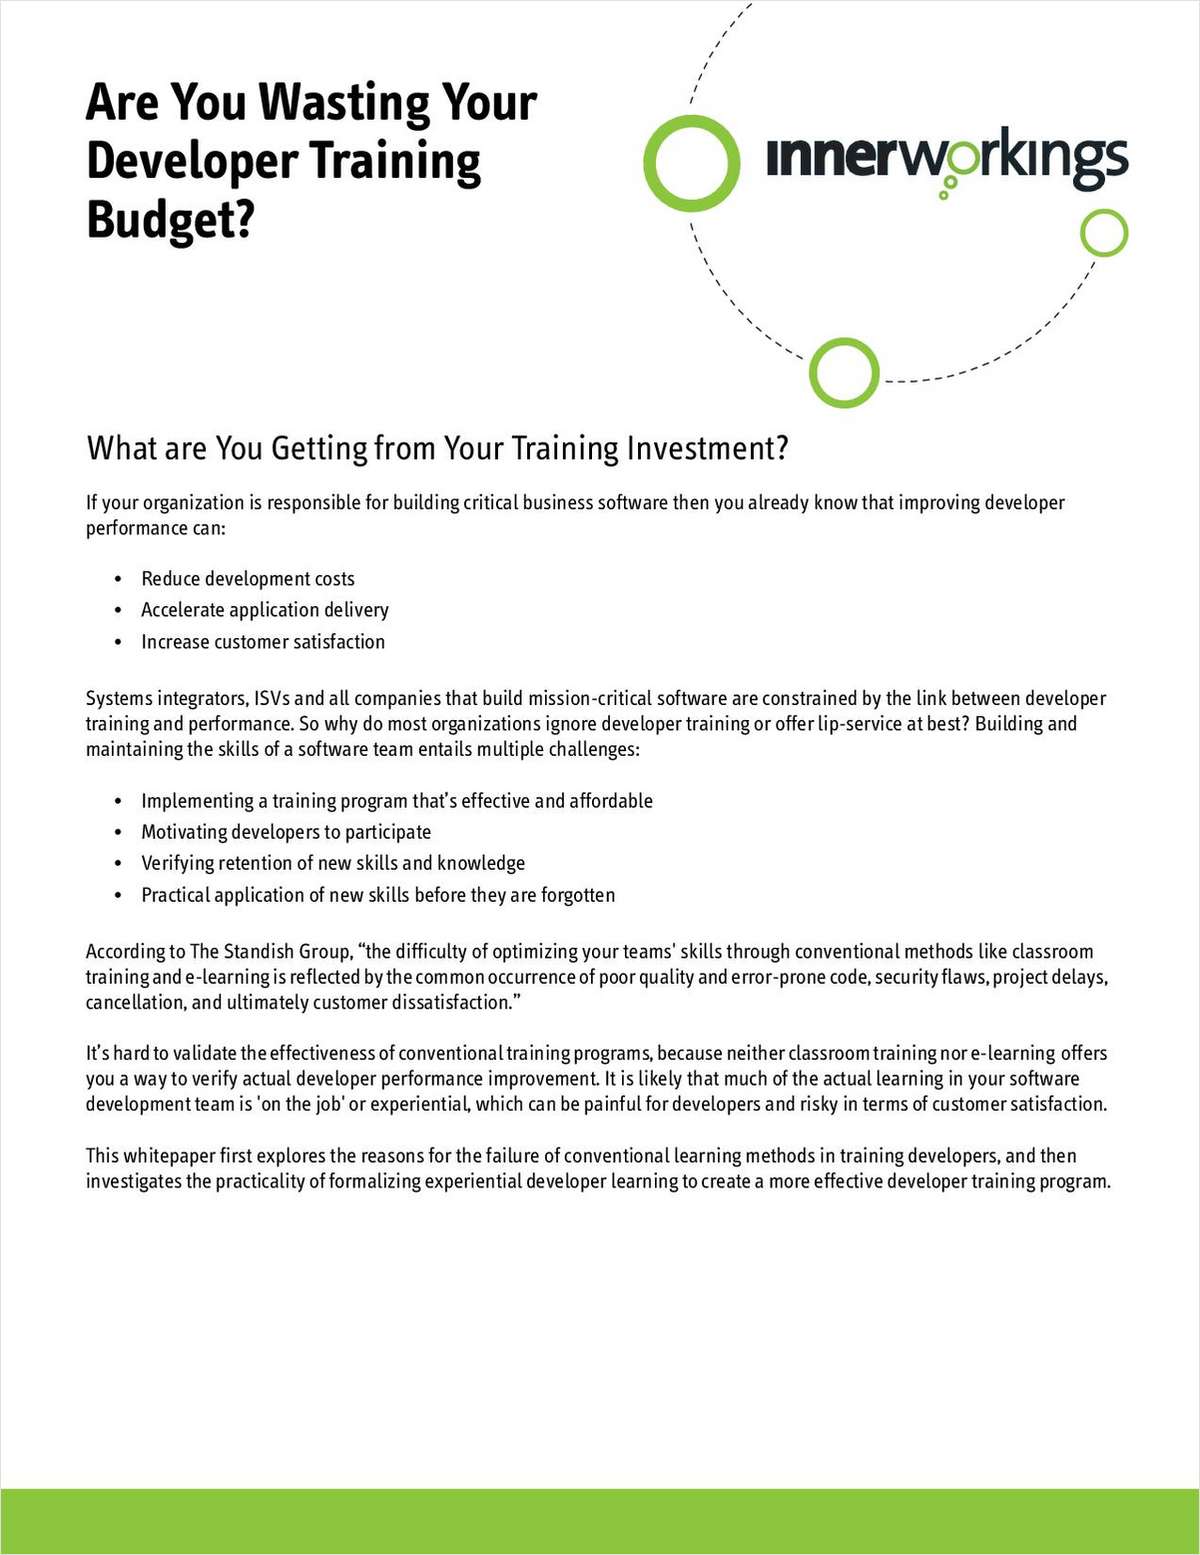 Are You Wasting Your .NET Developer Training Budget?